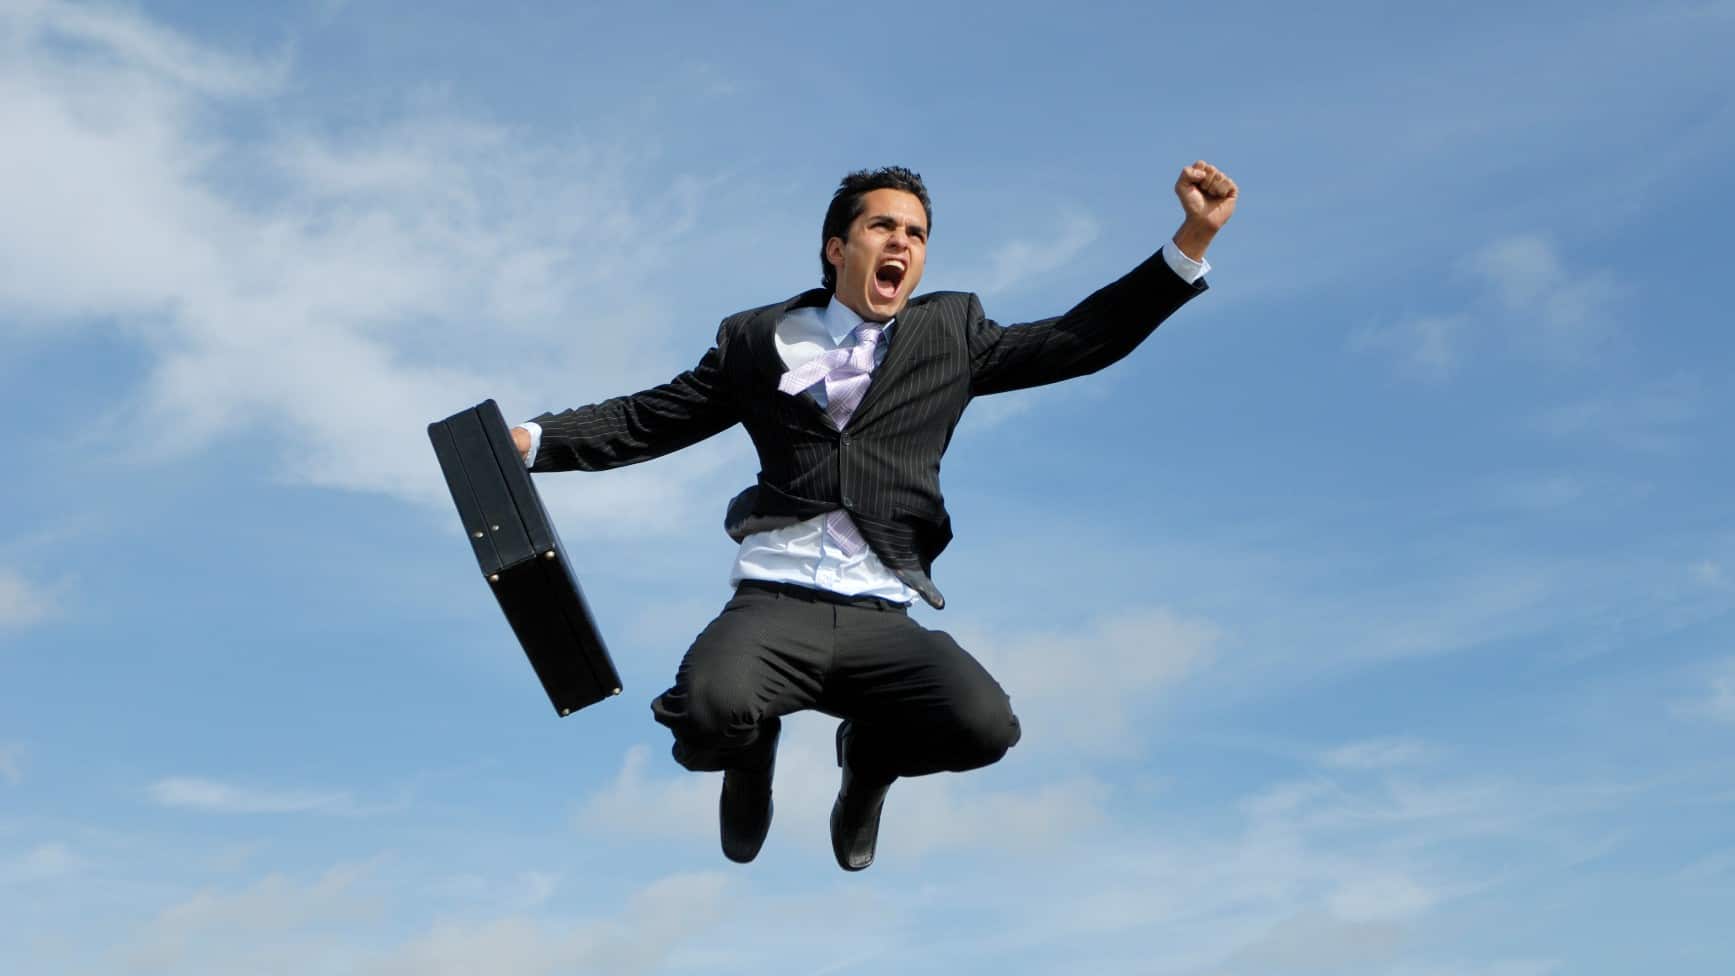 Businessman in suit and holding a briefcase jumps into the sky celebrating the rising share price.